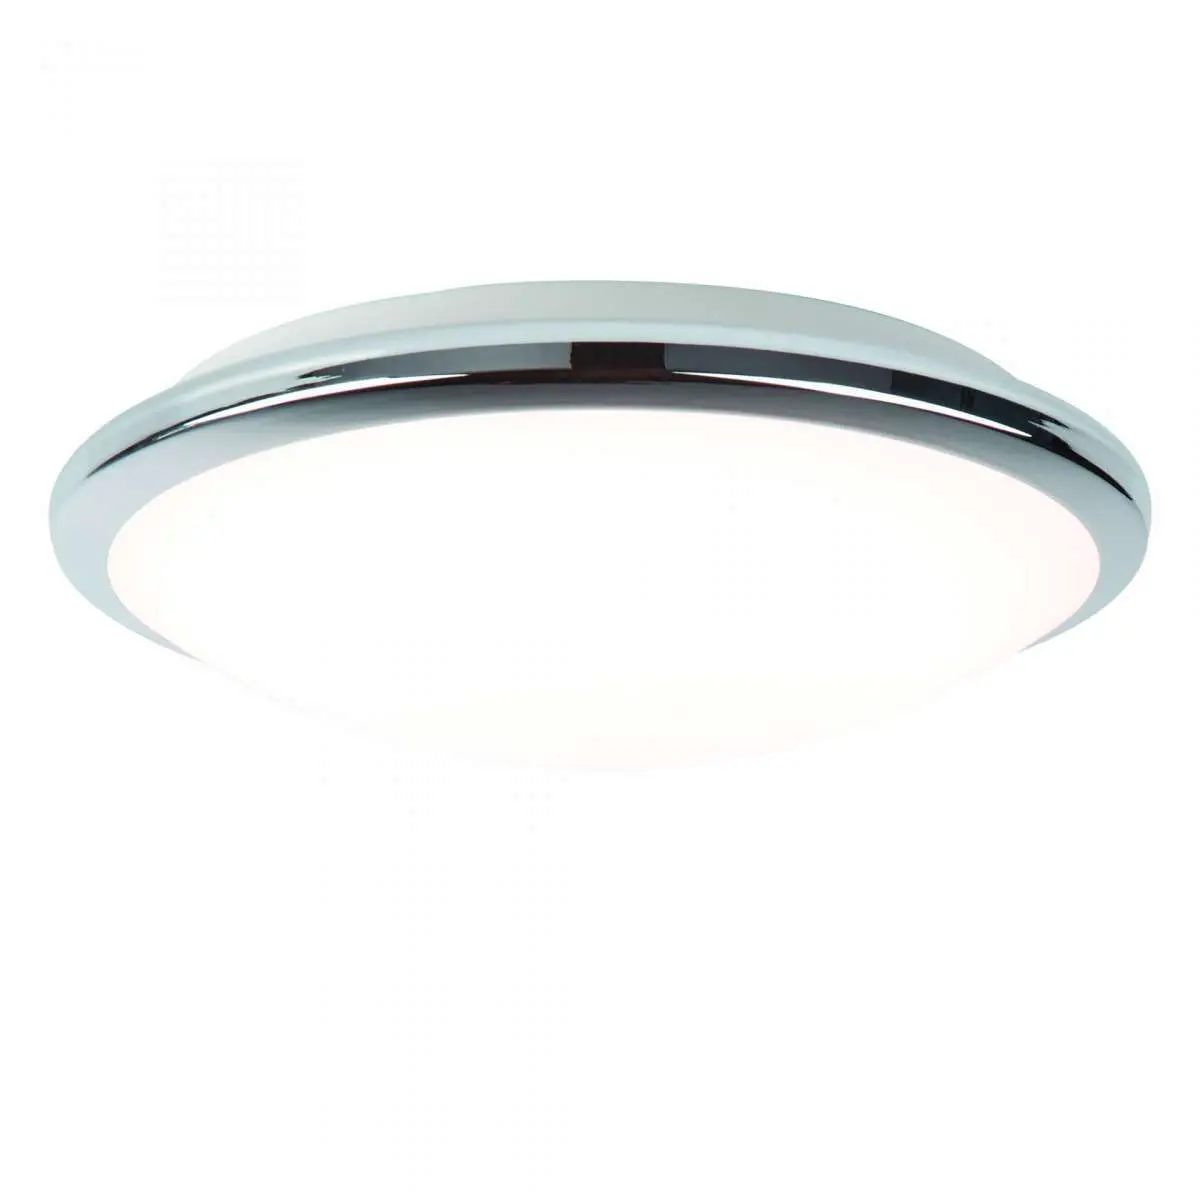 IP44 Chrome LED Flush Light with Frosted Glass Shade